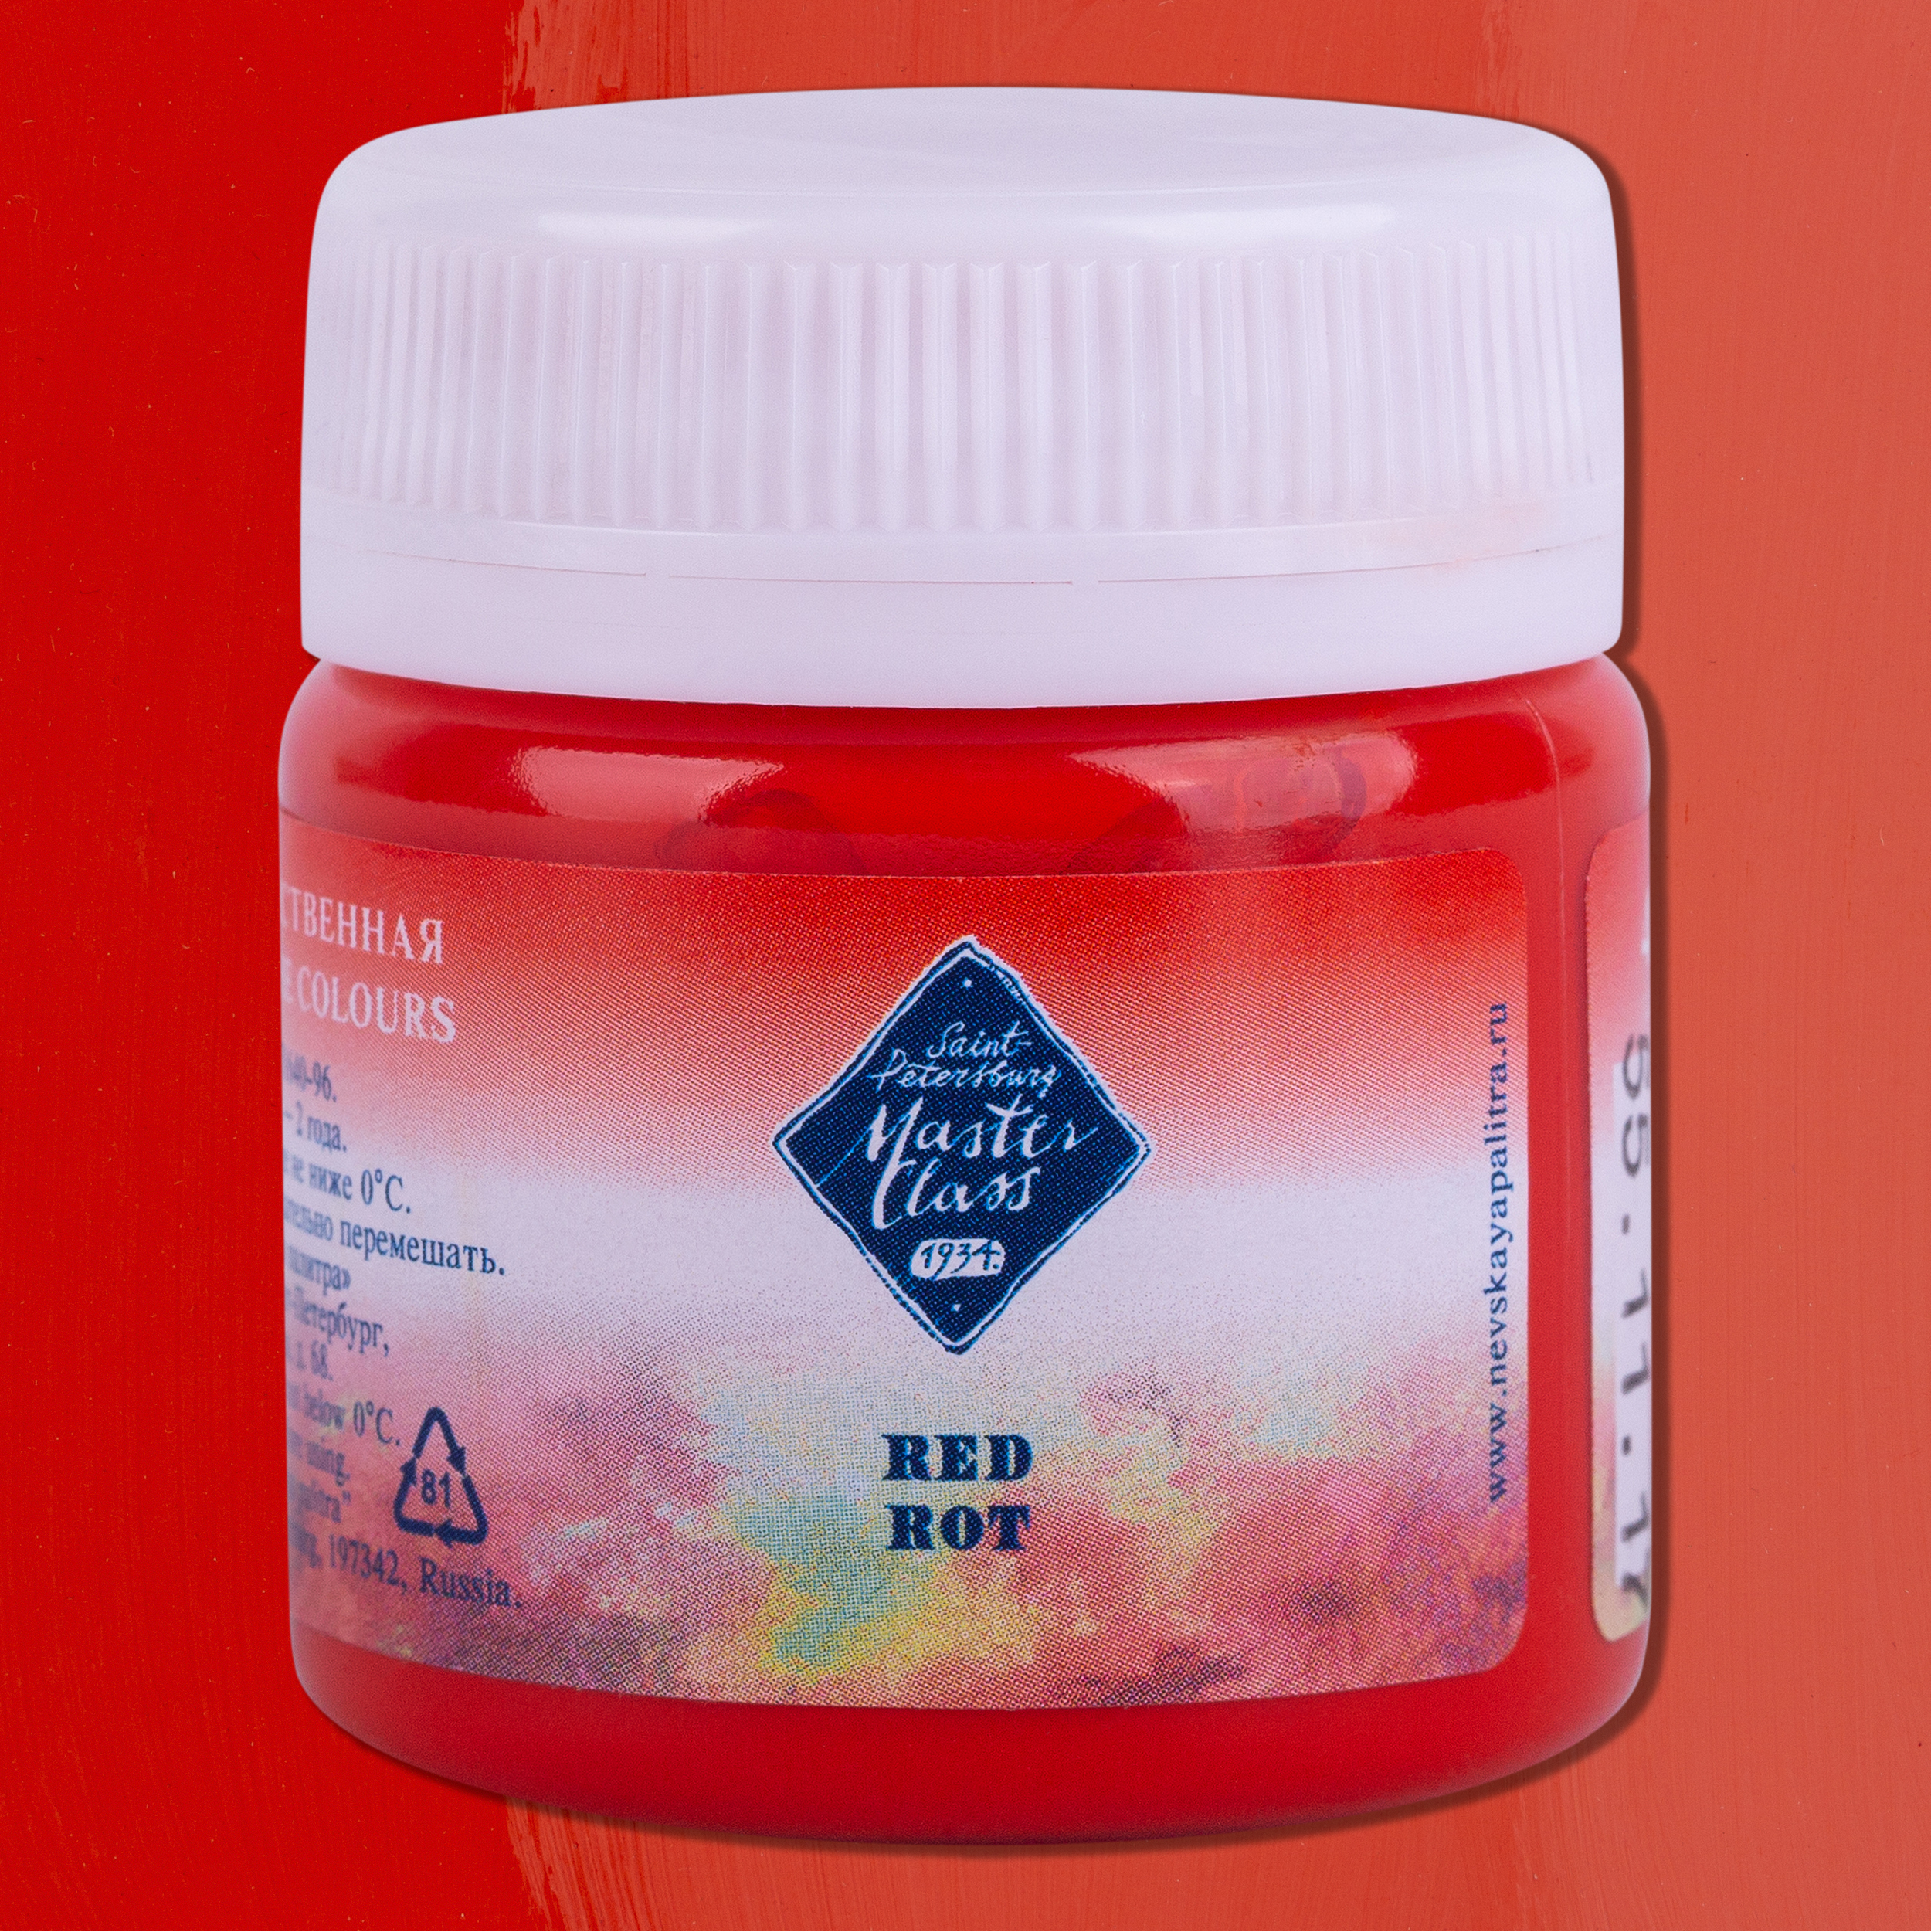 Red "Master Class" in the jar. № 331